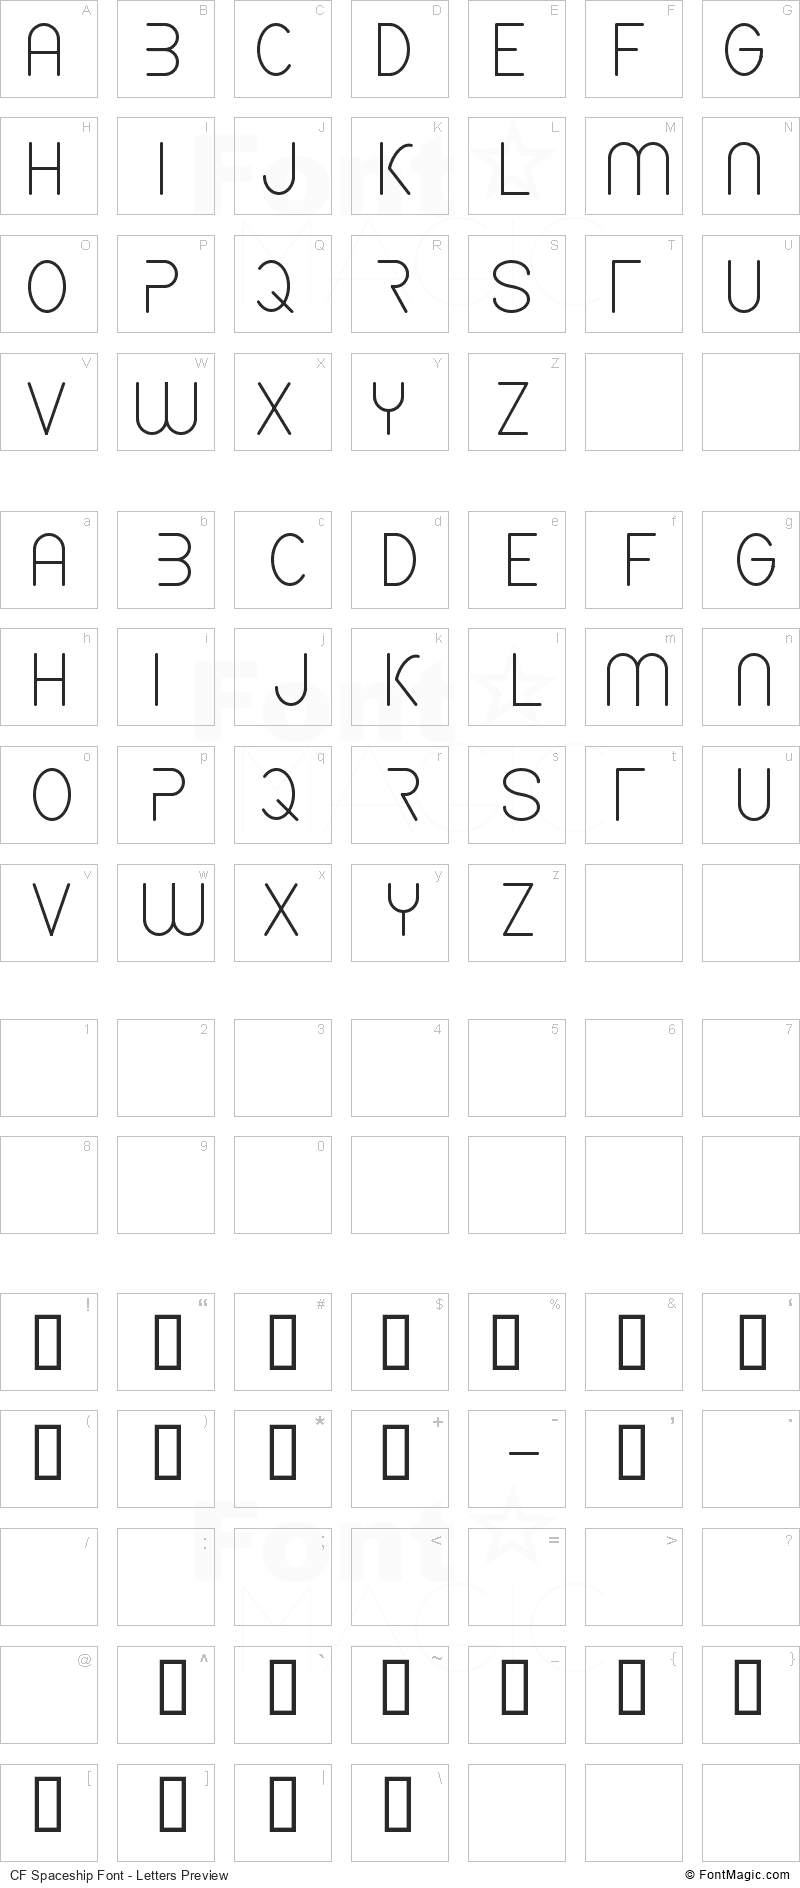 CF Spaceship Font - All Latters Preview Chart